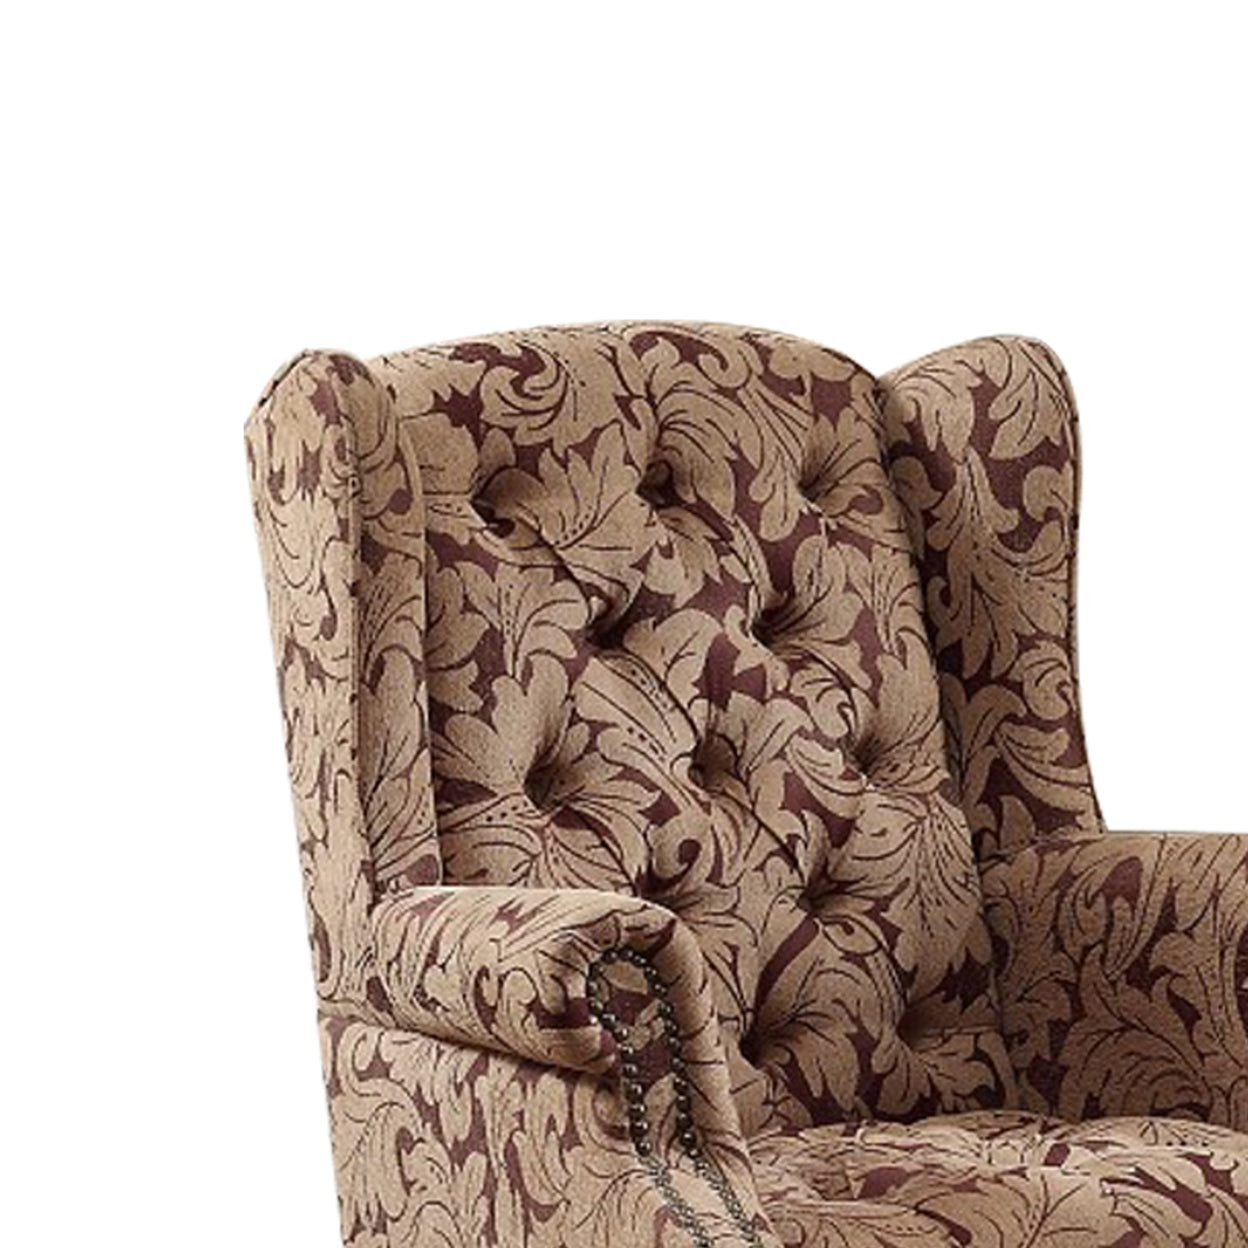 Tufted Back Accent Chair and Ottoman Light Brown and Burgundy